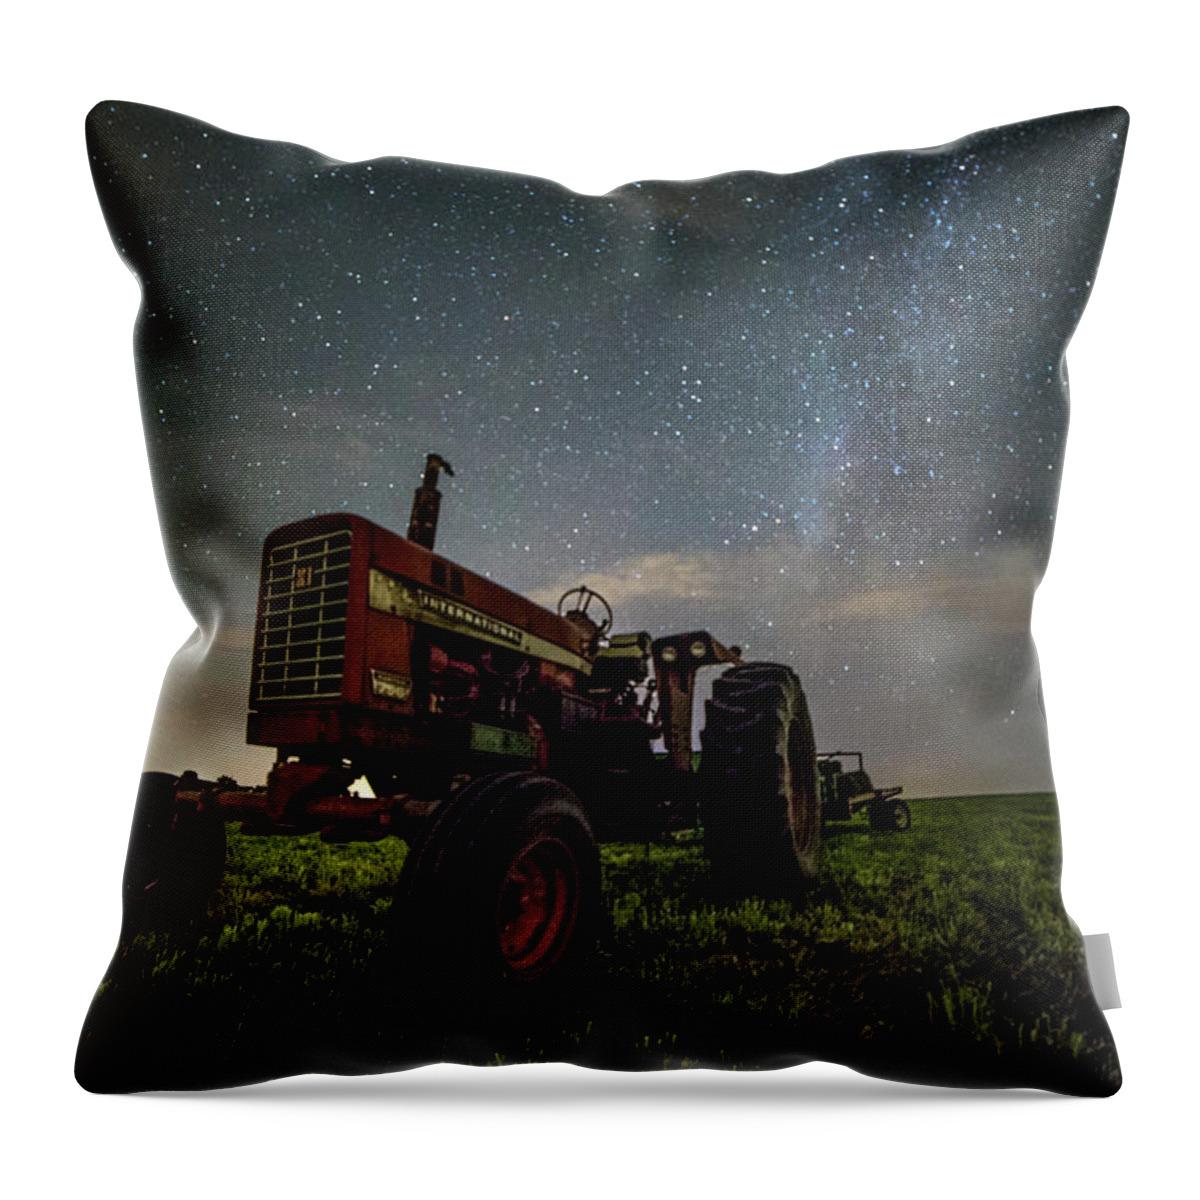 Night Throw Pillow featuring the photograph Black Moon by Aaron J Groen